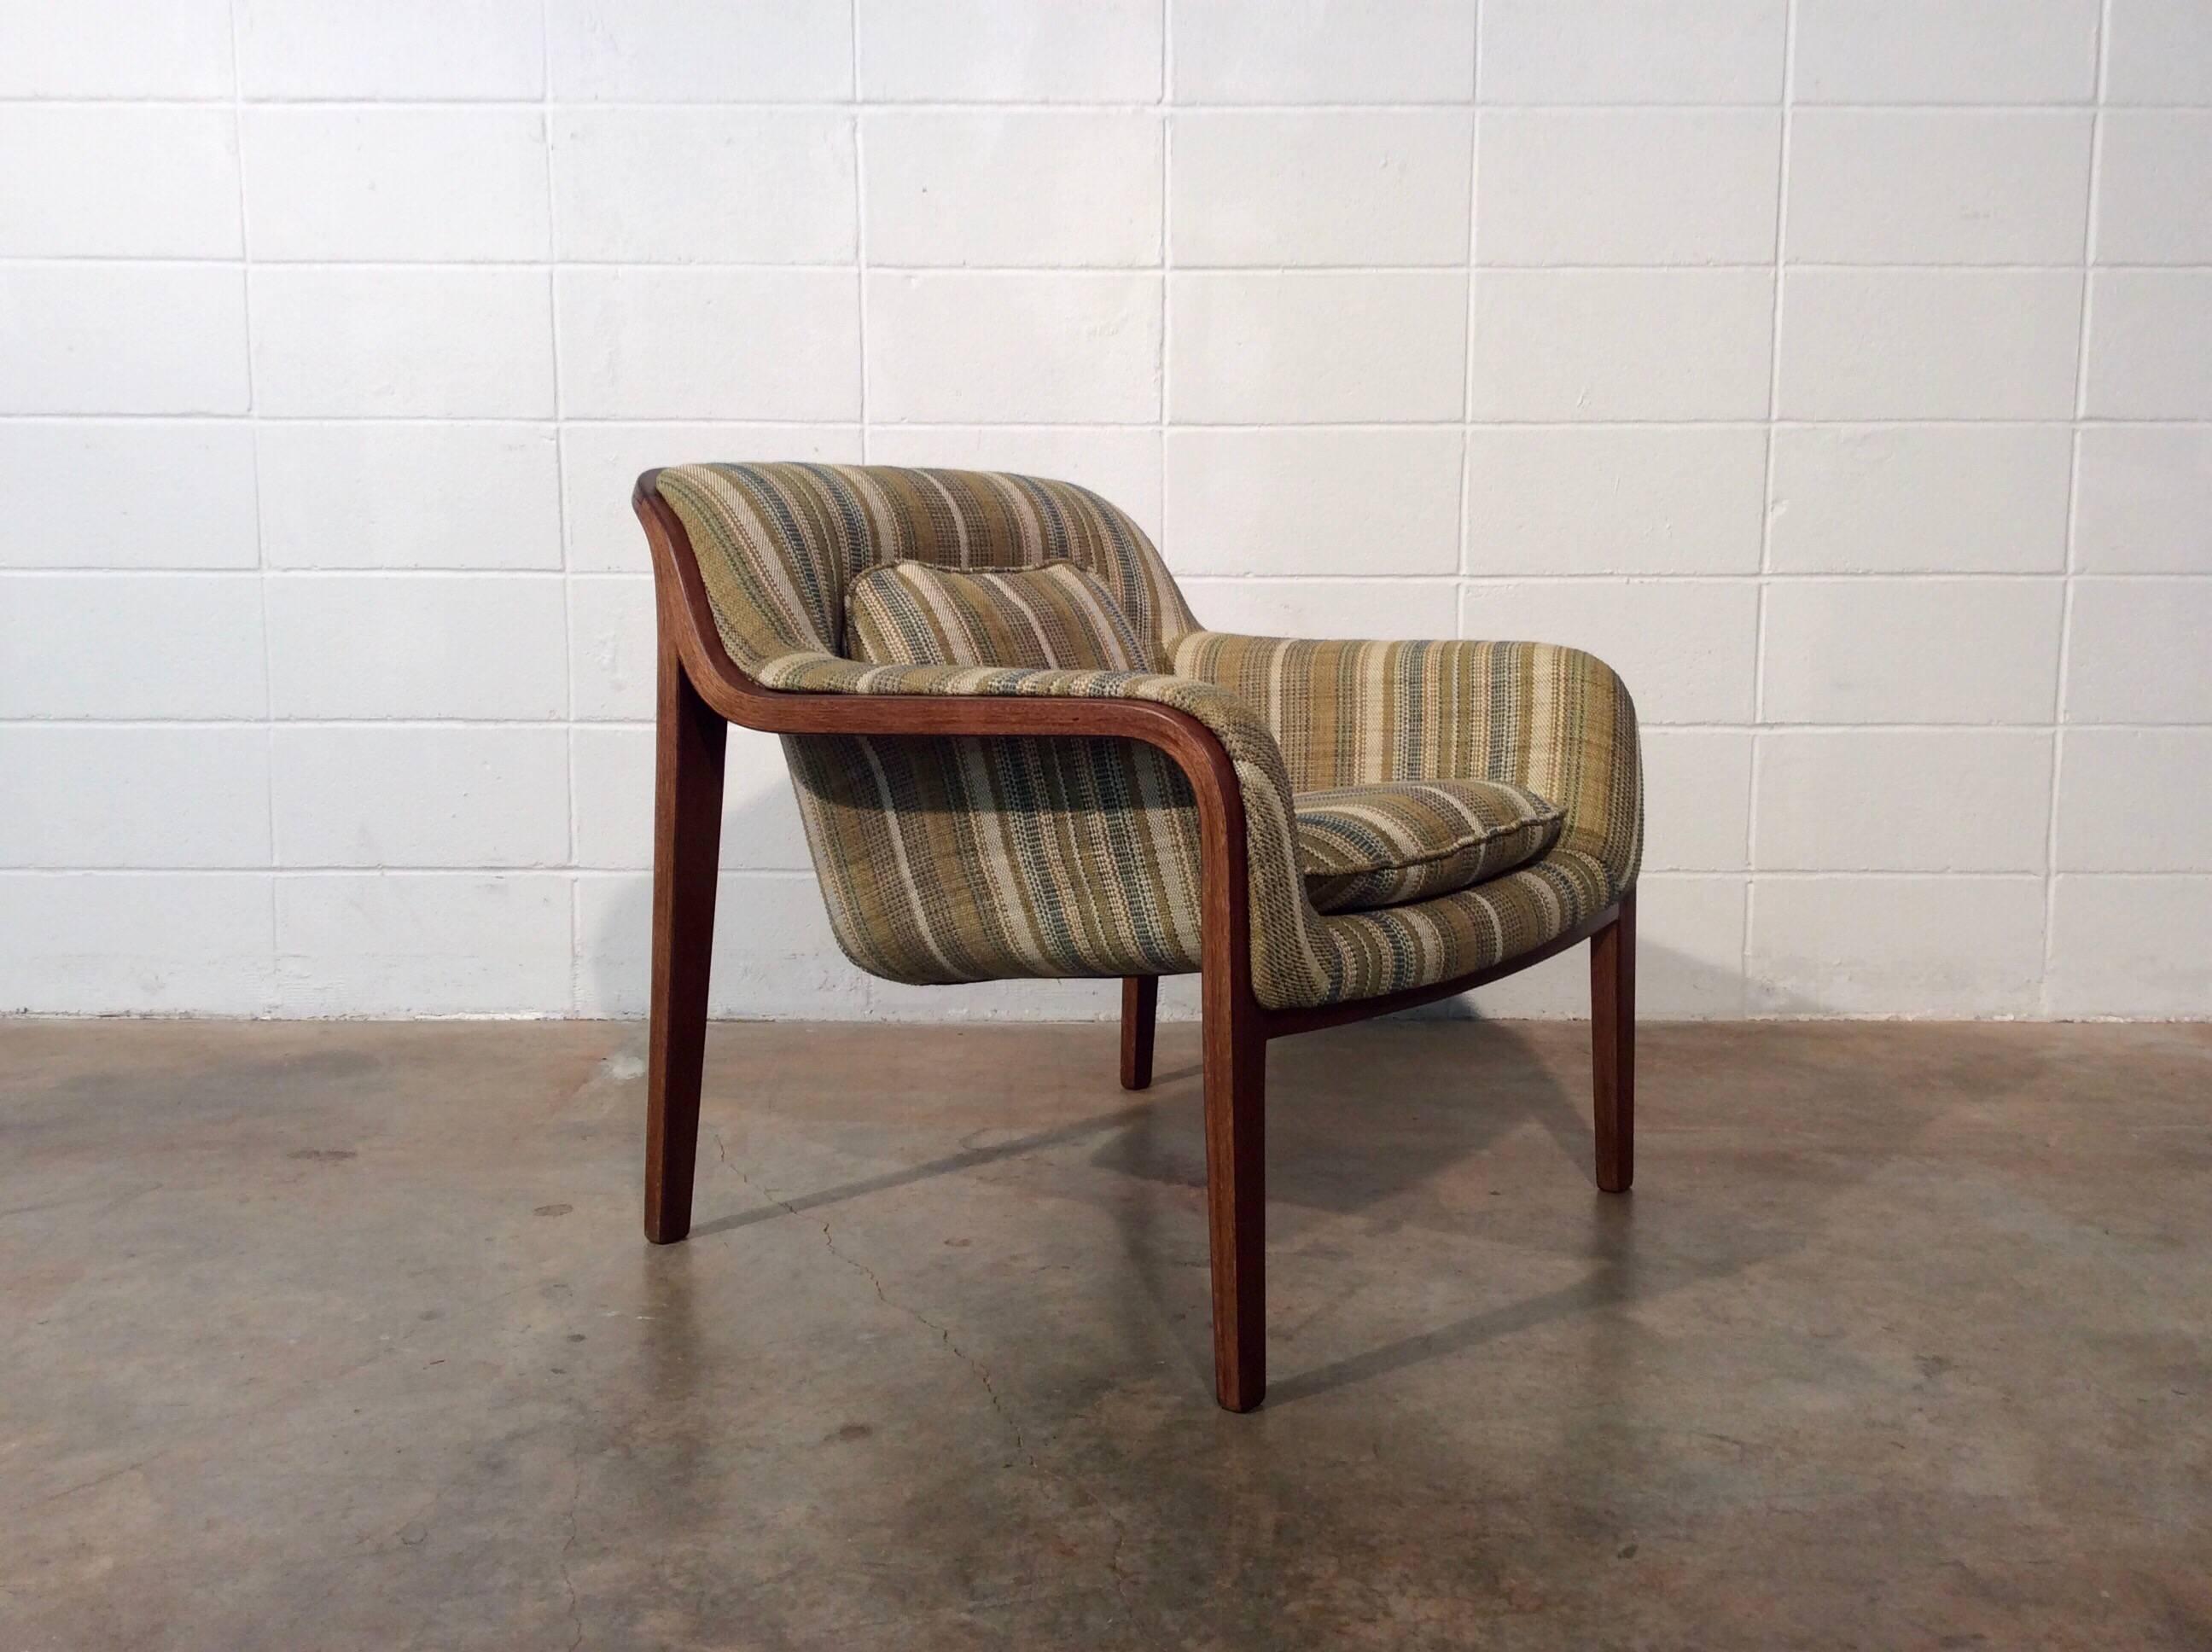 American Restored Mid-Century Modern Bent Wood Lounge Chair, Bill Stephens for Knoll